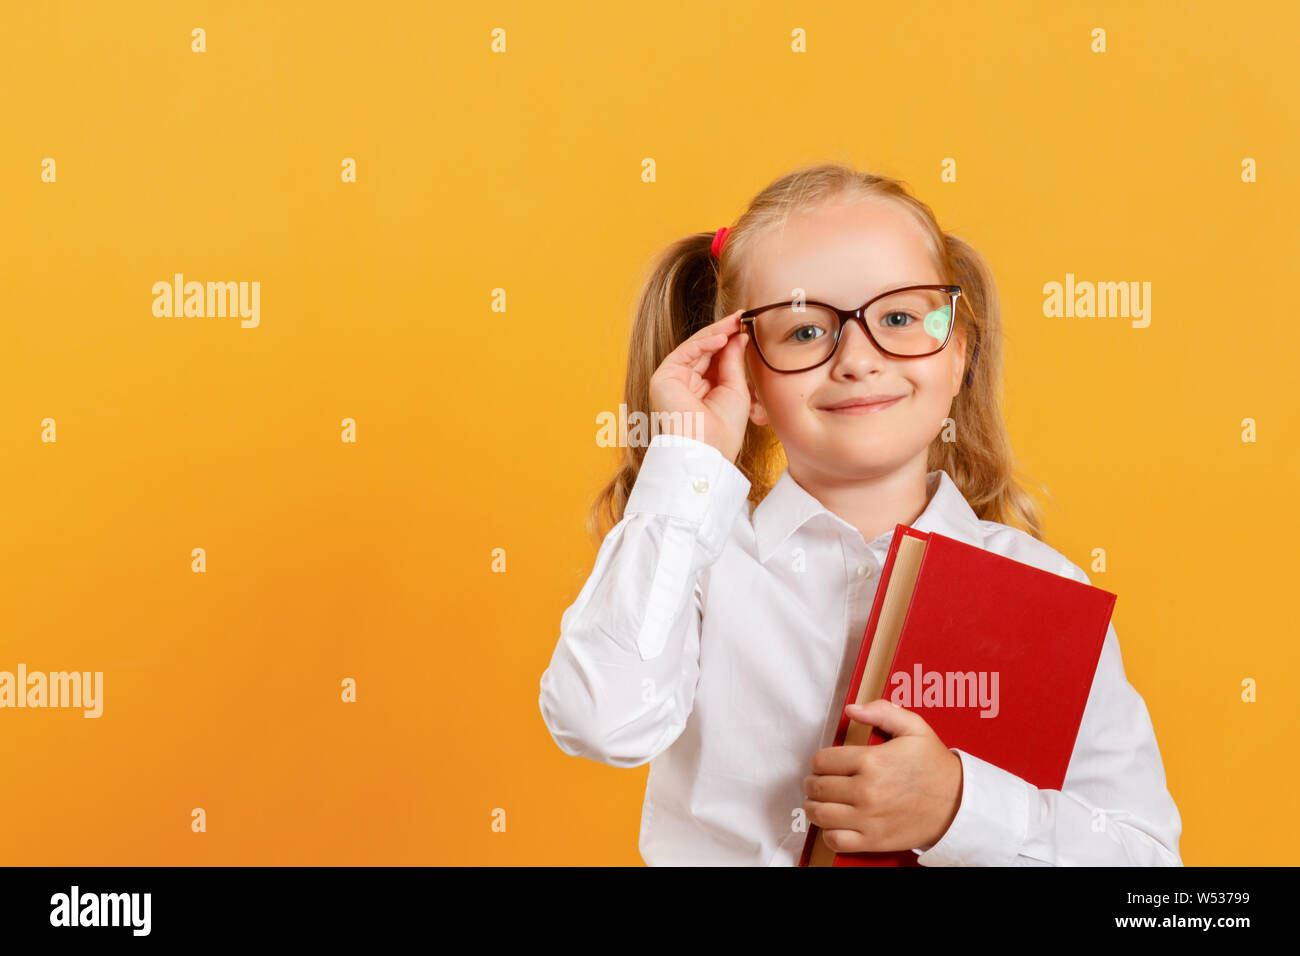 Portrait of a cute little girl on a yellow background. Child schoolgirl looking at the camera, holding a book and straightens glasses. The concept of Stock Photo